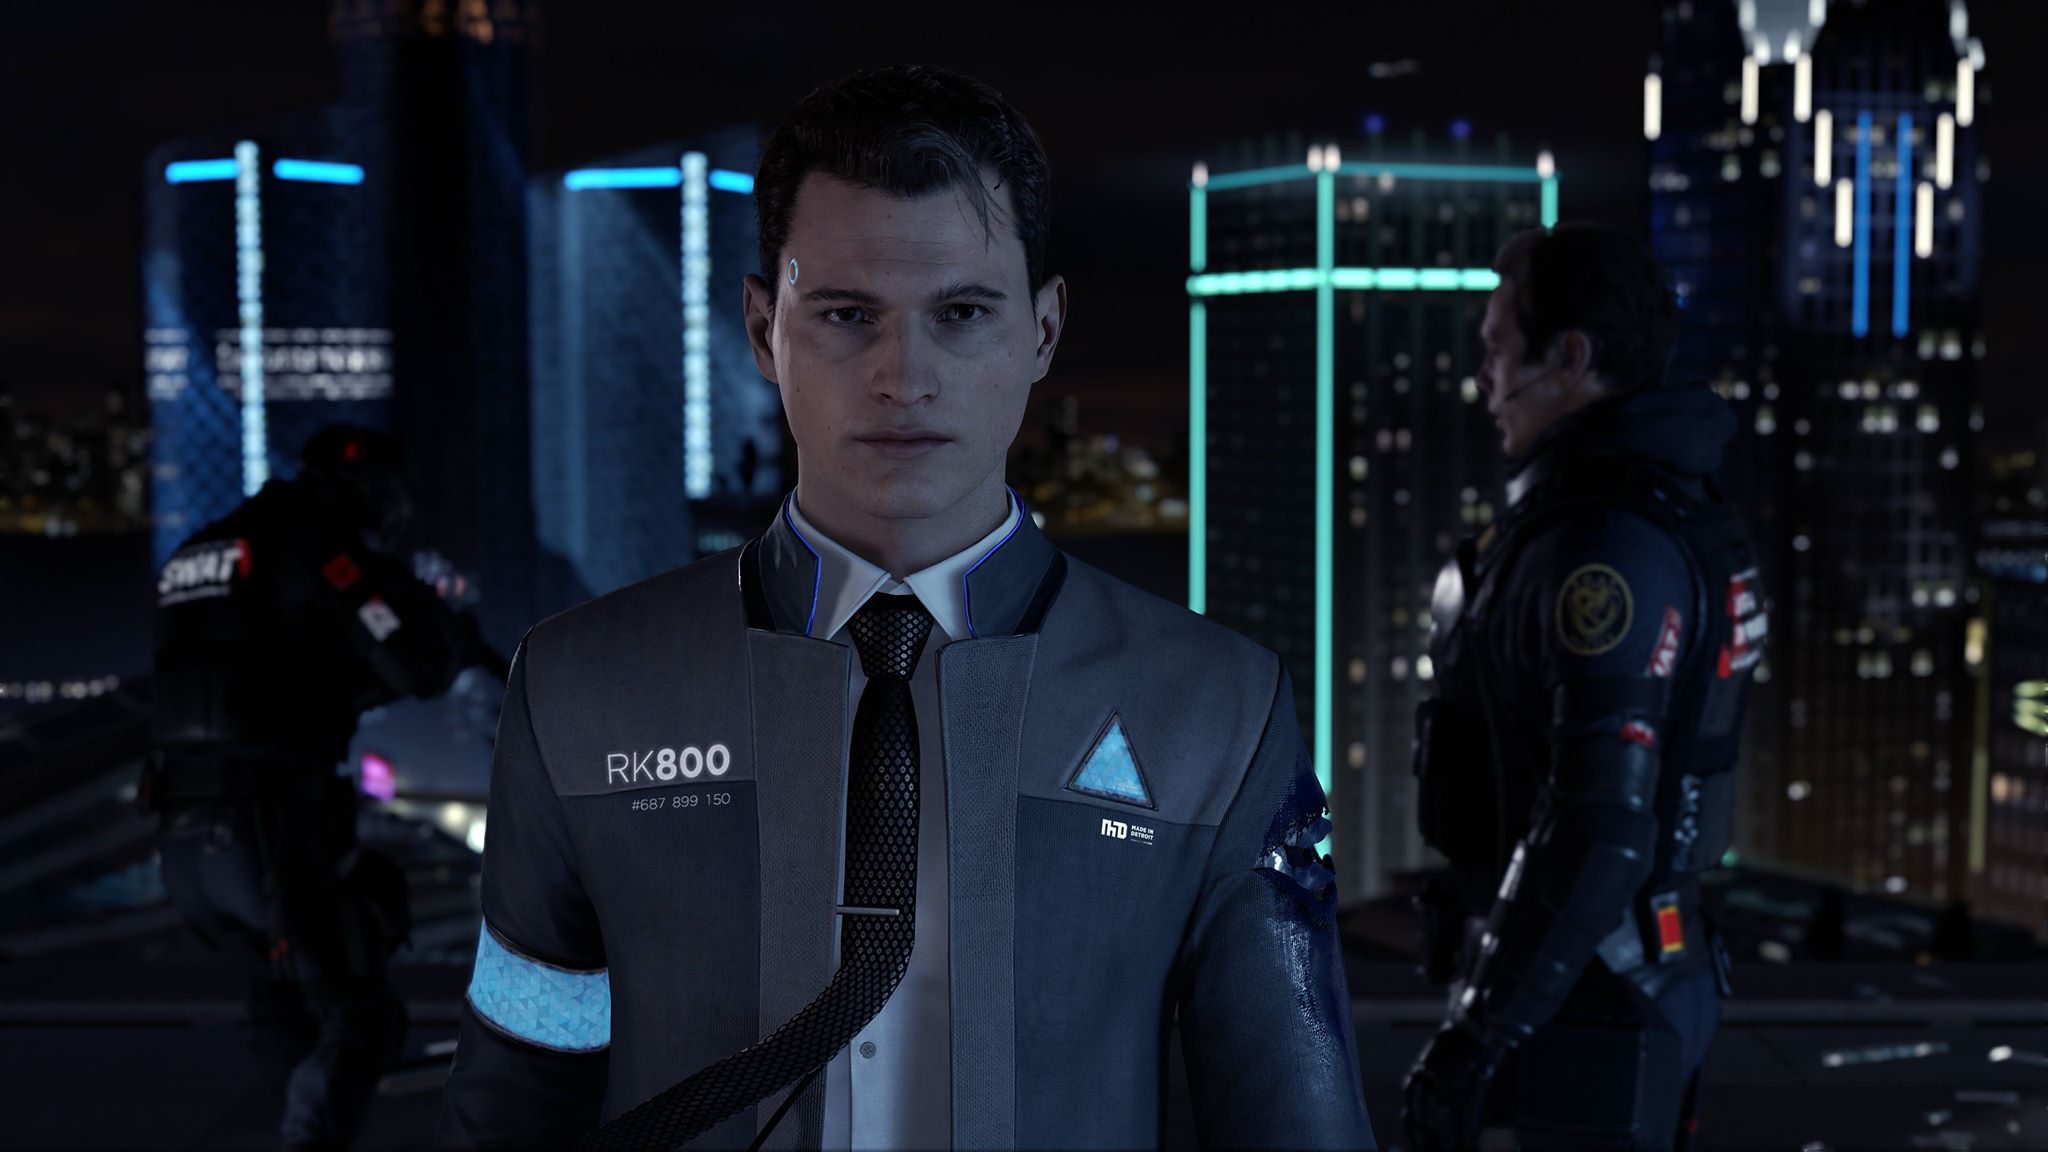 ‘Detroit: Become Human’ is free on PlayStation Plus this month